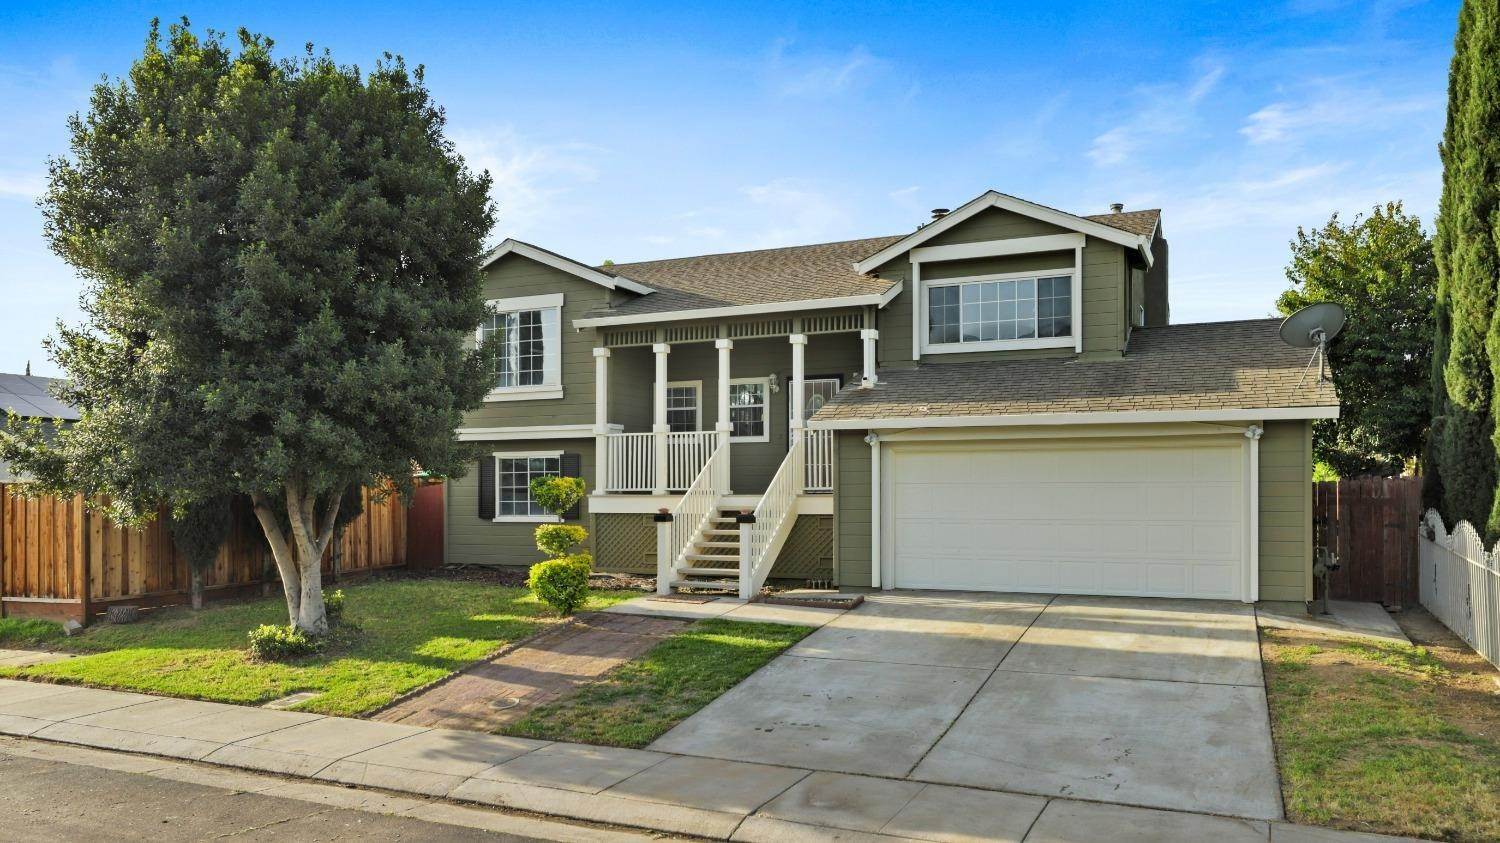 45. Single Family Homes for Active at 1140 O Street Lathrop, California 95330 United States